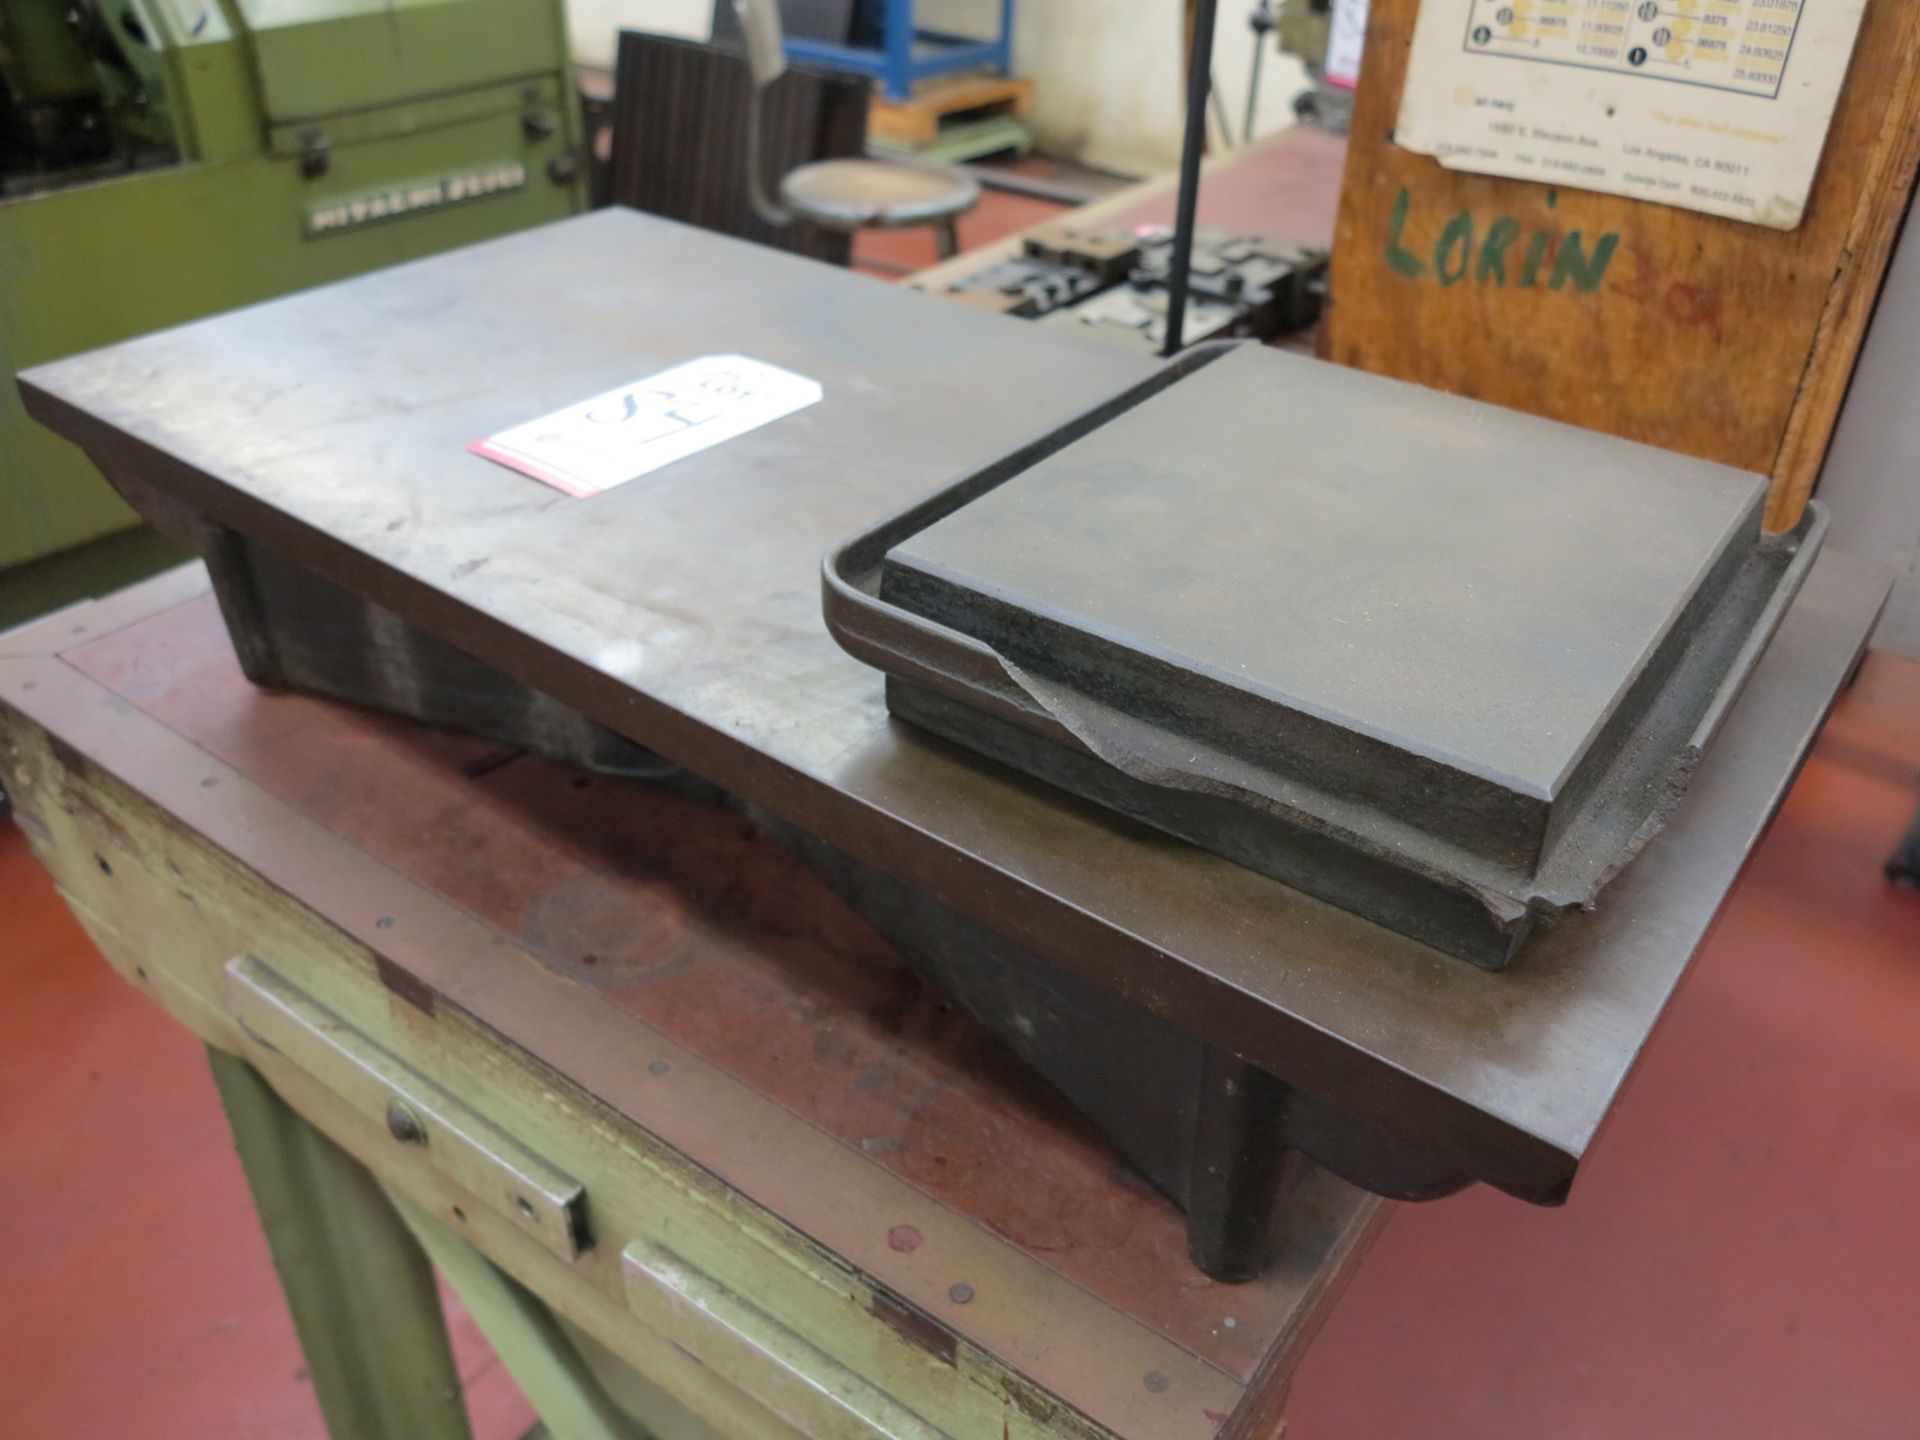 LOT - (2) STEEL SURFACE PLATES: 30-1/2" X 15-1/2" AND 10" X 8-1/2" - Image 3 of 3